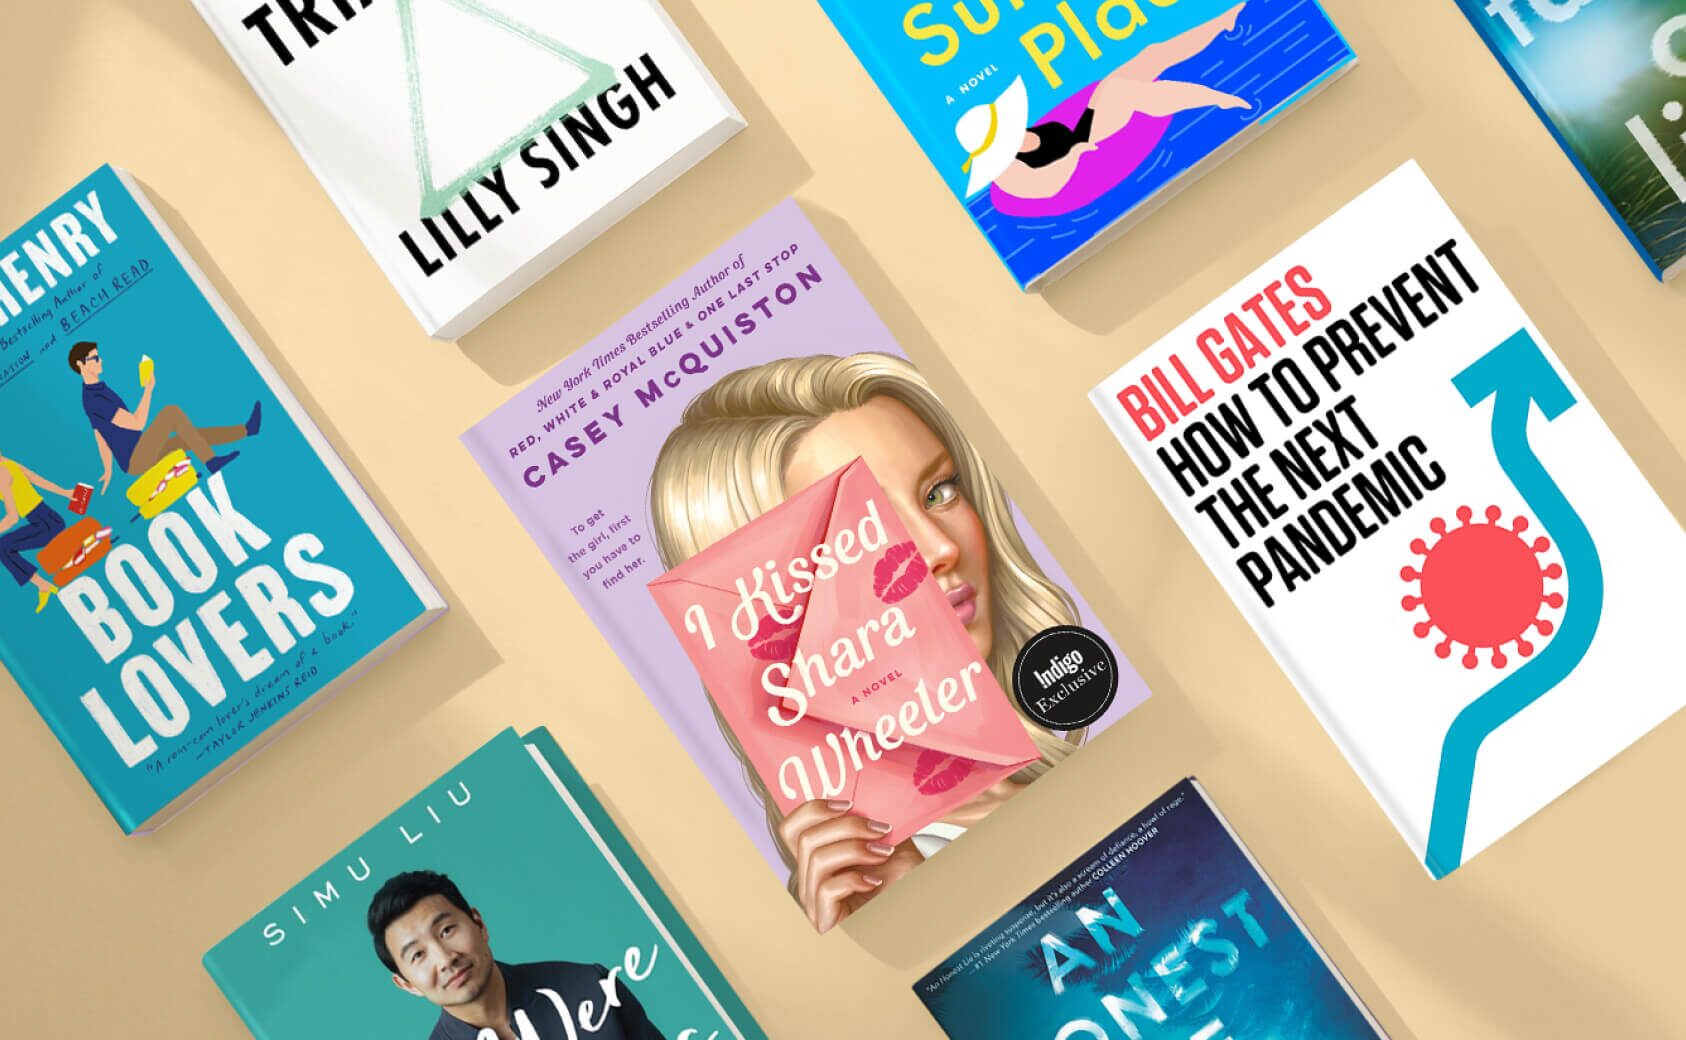 Summer Reading. Explore the blockbuster books of the season we can’t put down.